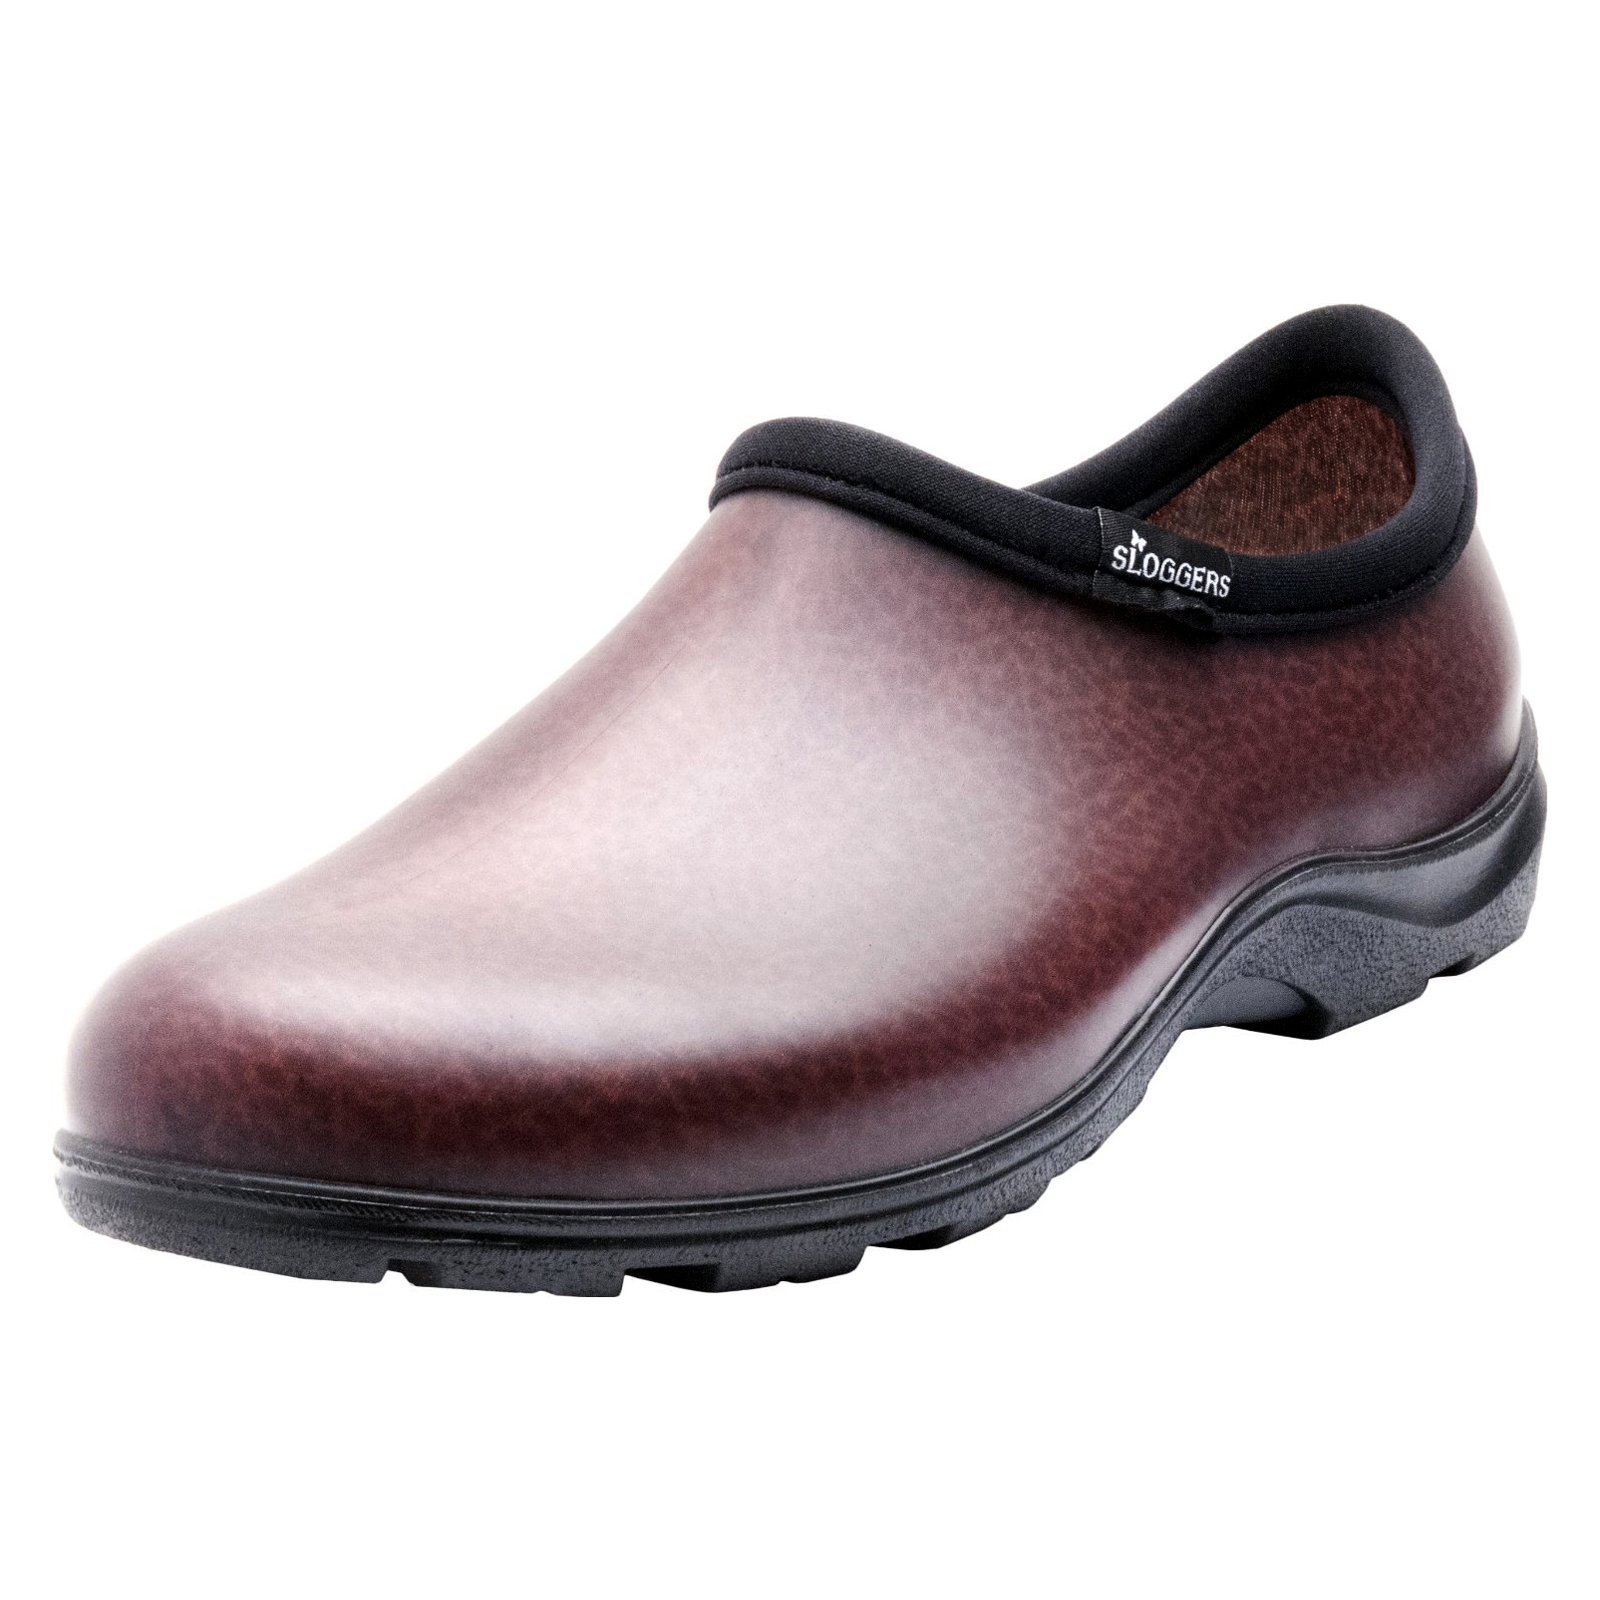 Sloggers Short Rain and Garden Shoes (Men) - image 1 of 2